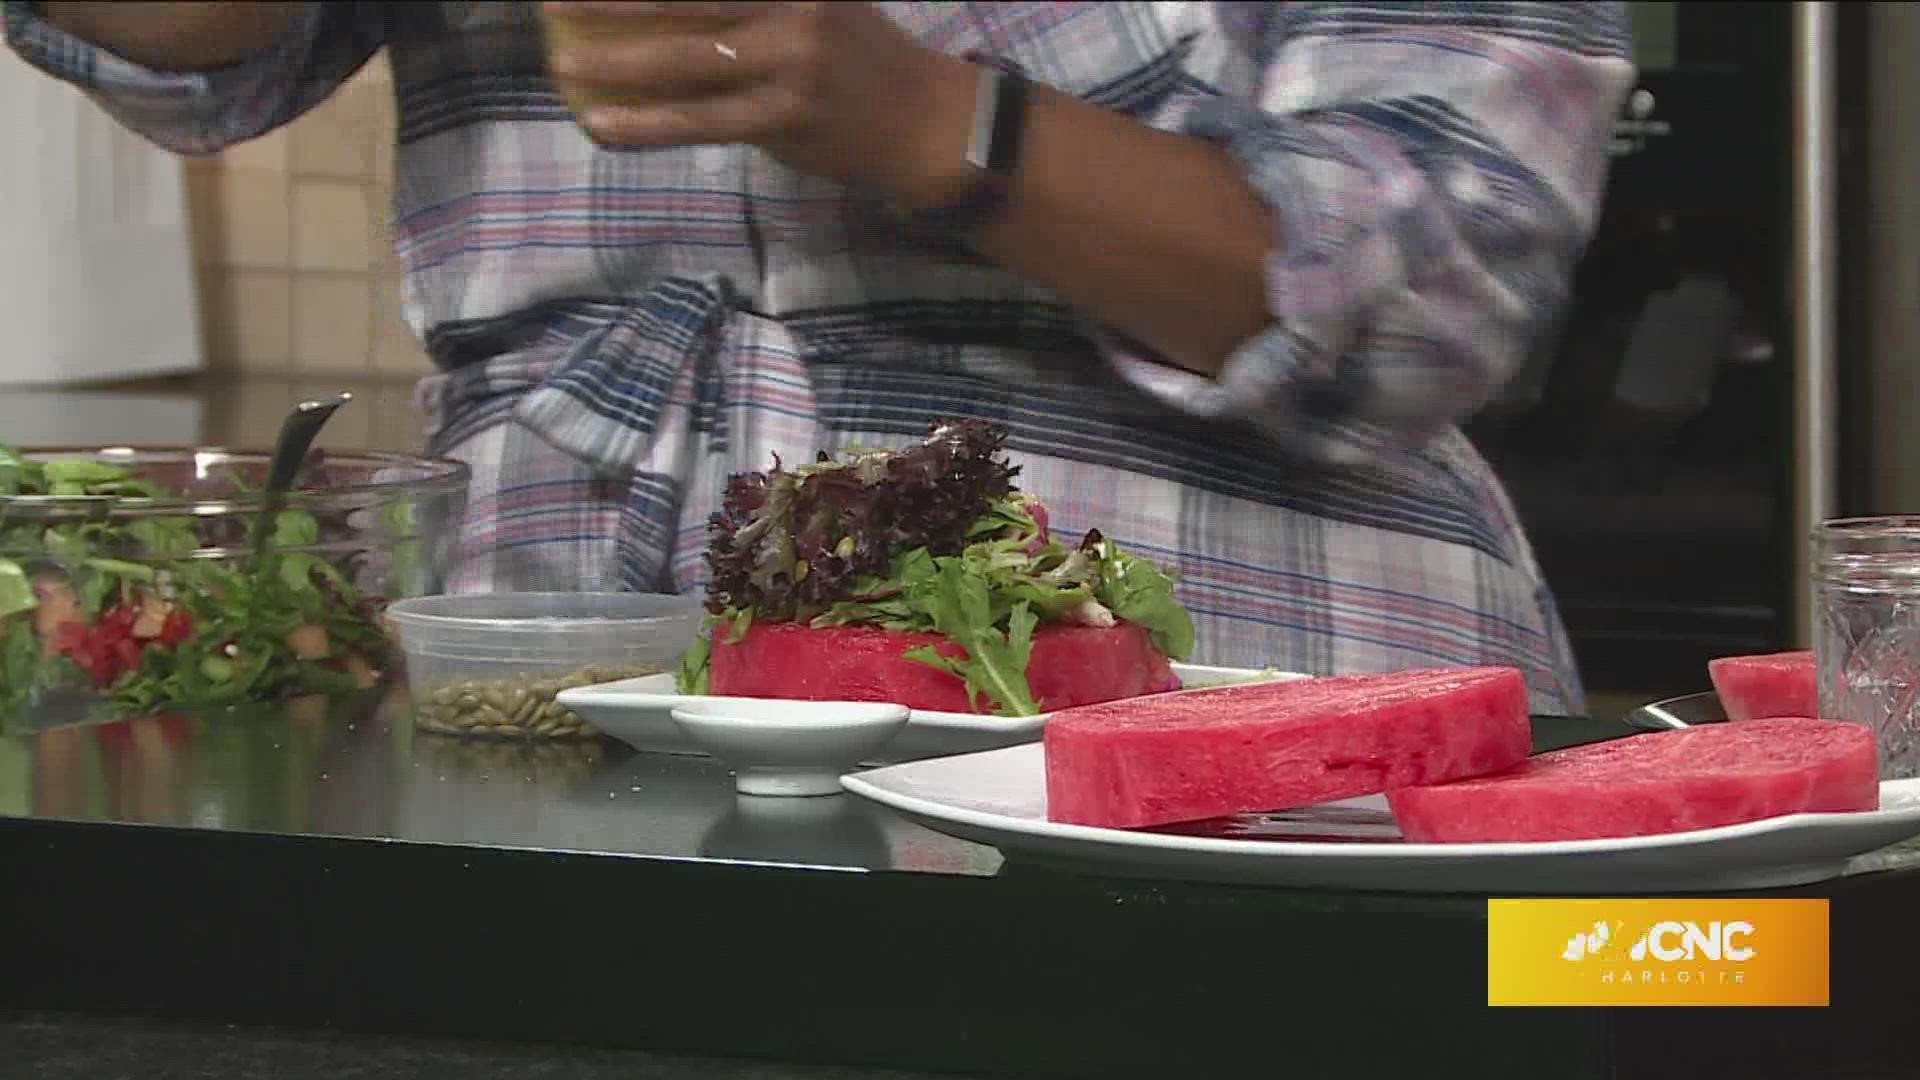 Watermelon "steak" salad from chef Andria Gaskins